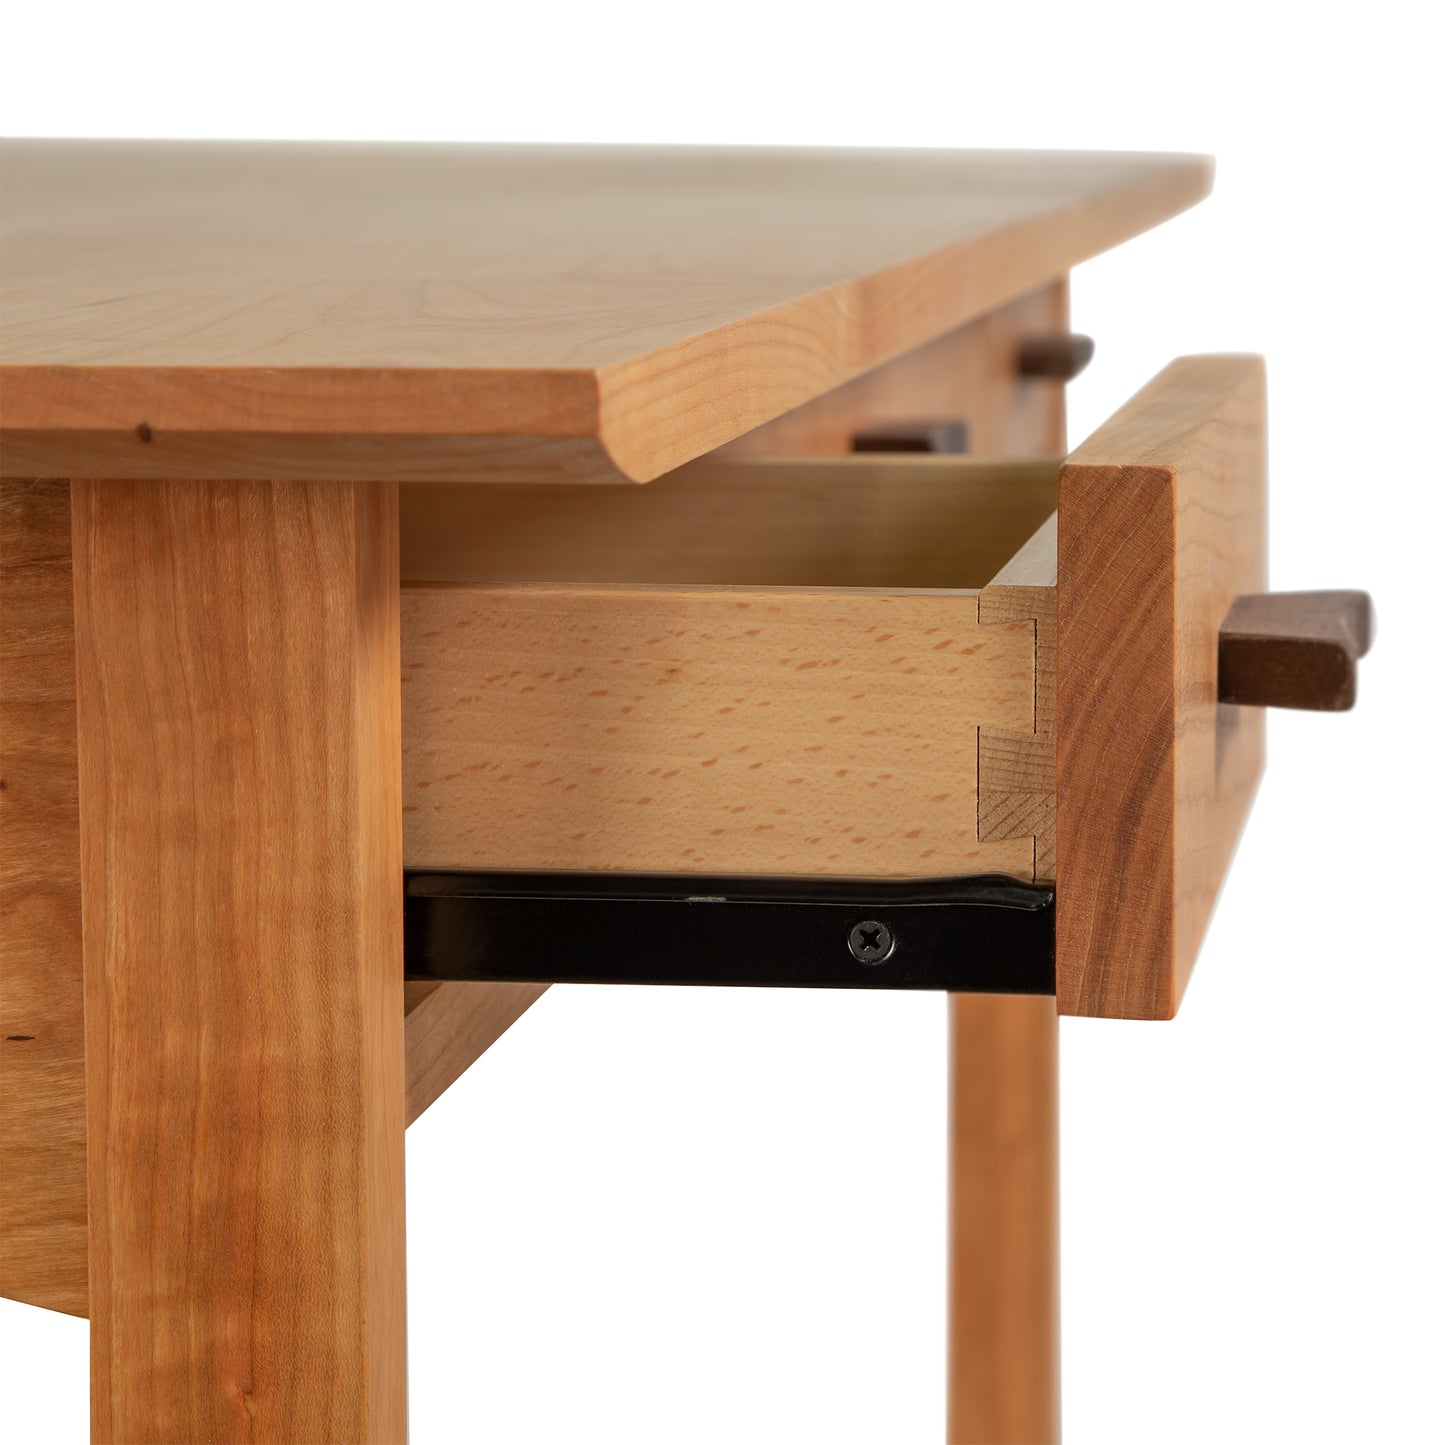 A Vermont Furniture Designs Contemporary Craftsman Library Desk with a drawer under it for study or office use.